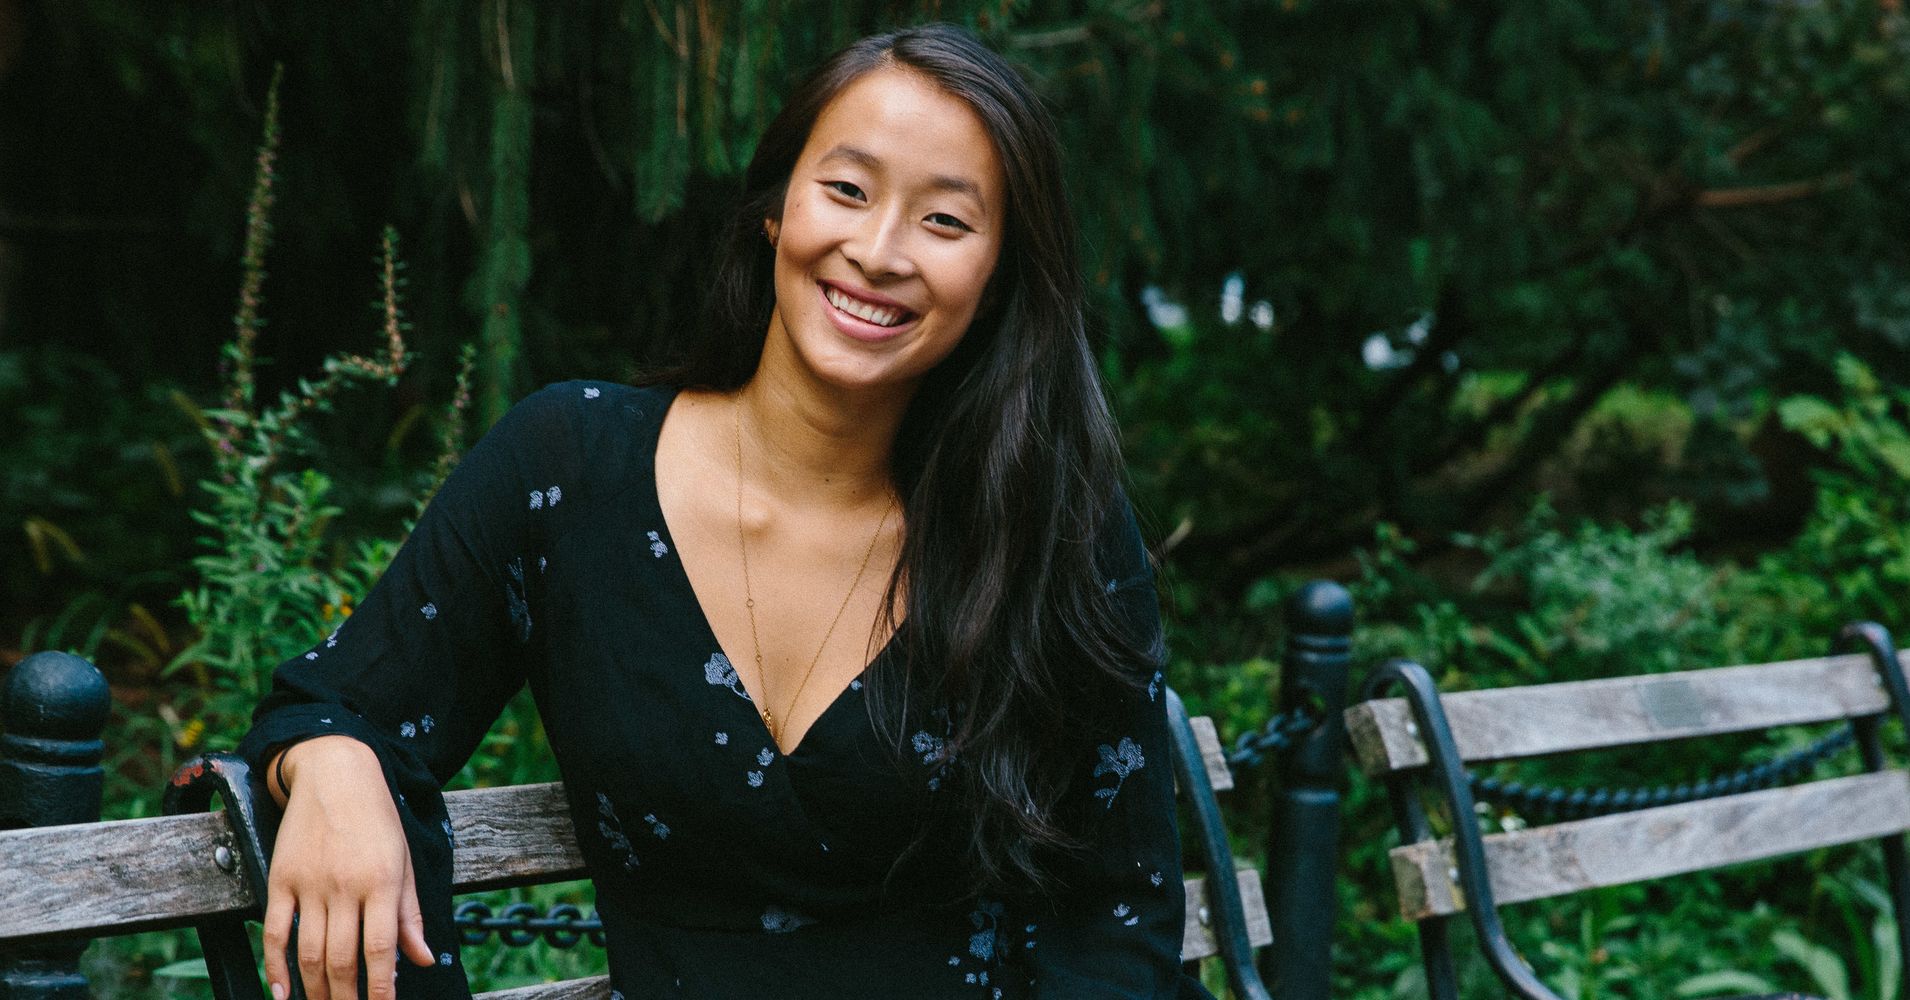 This Teen Is Bringing Menstrual Products To Homeless Women Around The World